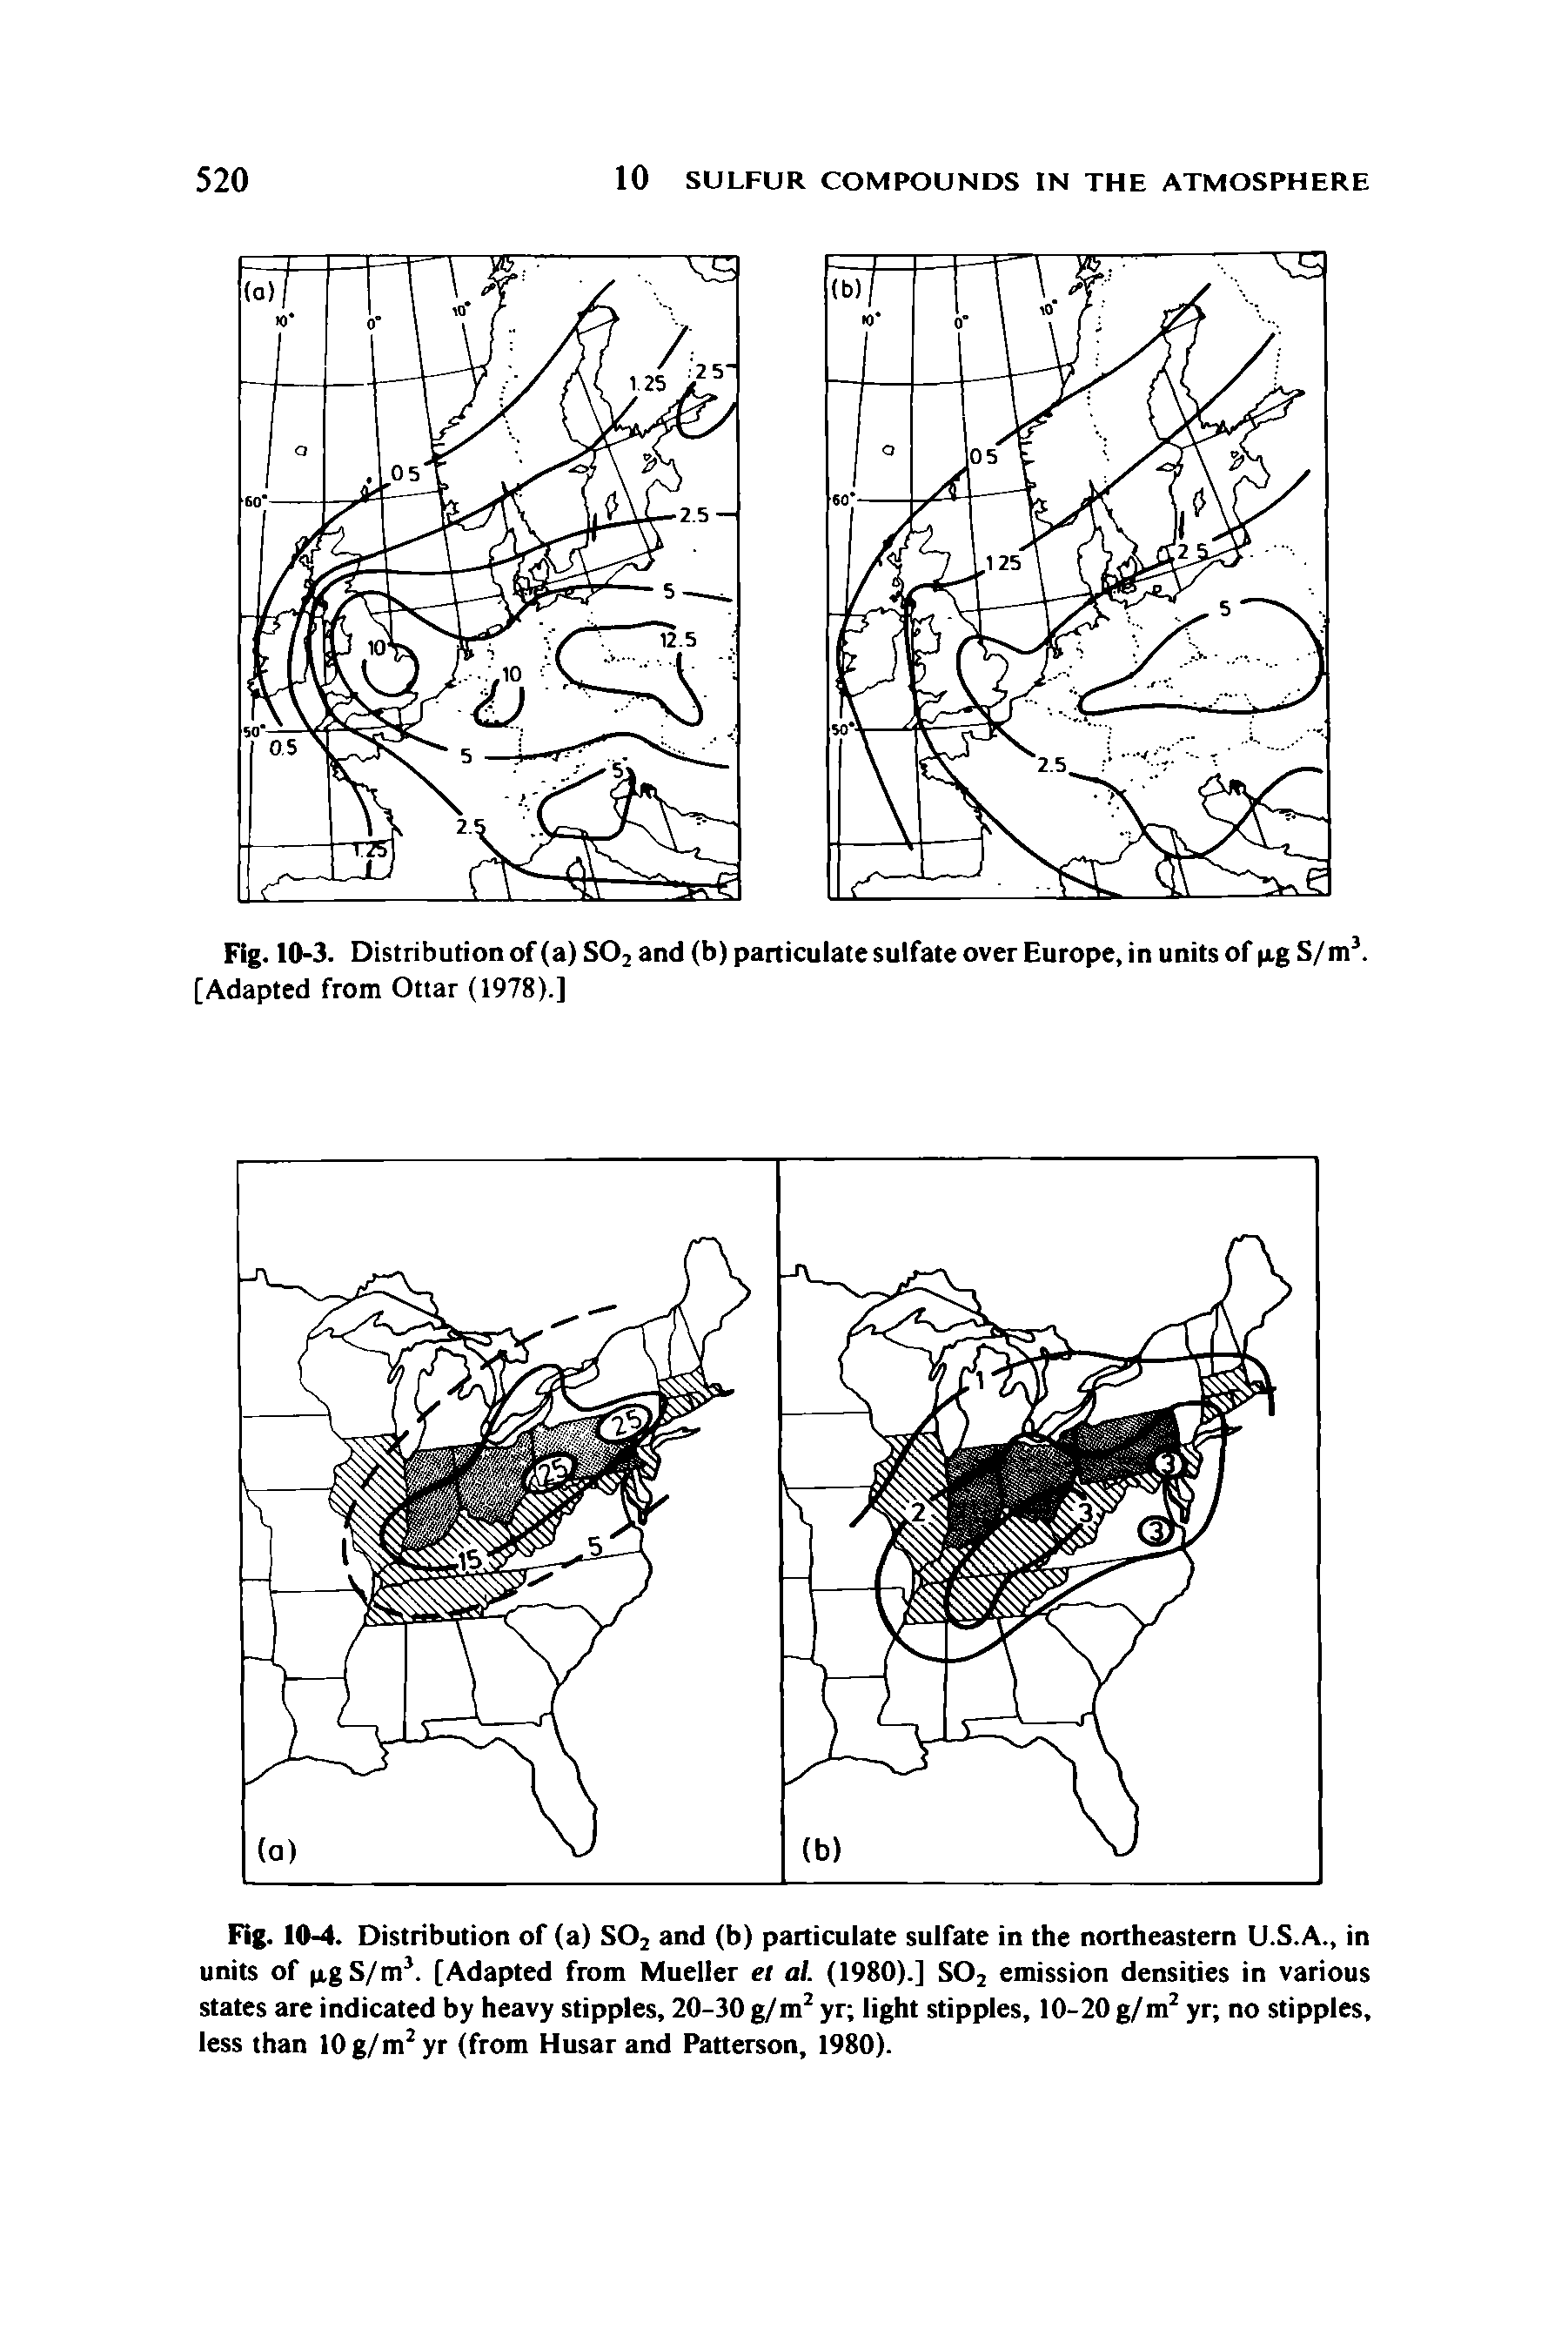 Fig. 10-4. Distribution of (a) S02 and (b) particulate sulfate in the northeastern U.S.A., in units of p.g S/m3. [Adapted from Mueller el al. (1980).] S02 emission densities in various states are indicated by heavy stipples, 20-30 g/m2 yr light stipples, 10-20 g/m2 yr no stipples, less than 10g/m2yr (from Husar and Patterson, 1980).